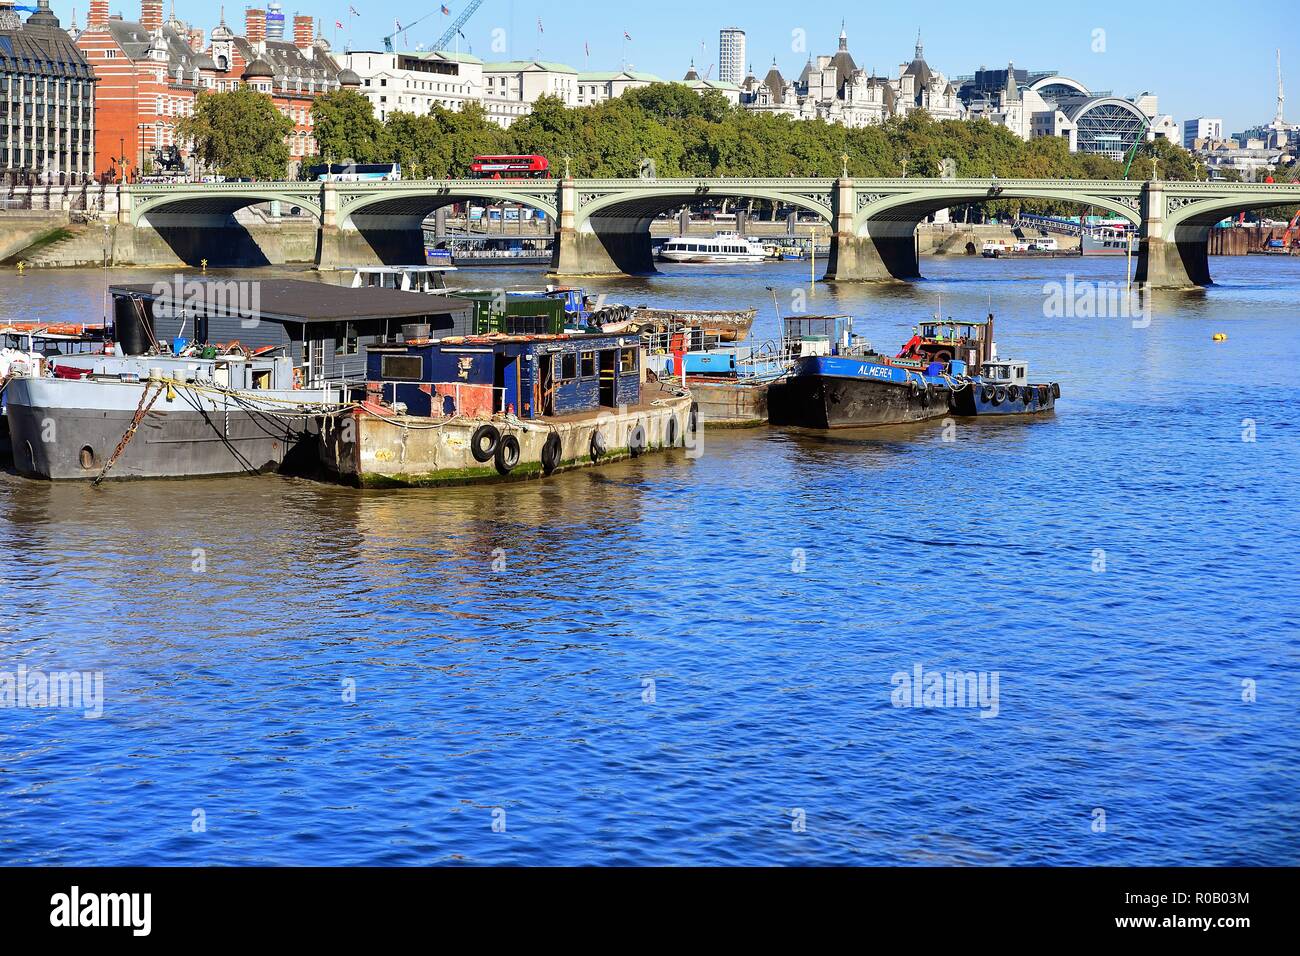 London, England, United Kingdom. Boats anchored on the River Thames provide a foreground for the Westminster Bridge beyond. Stock Photo